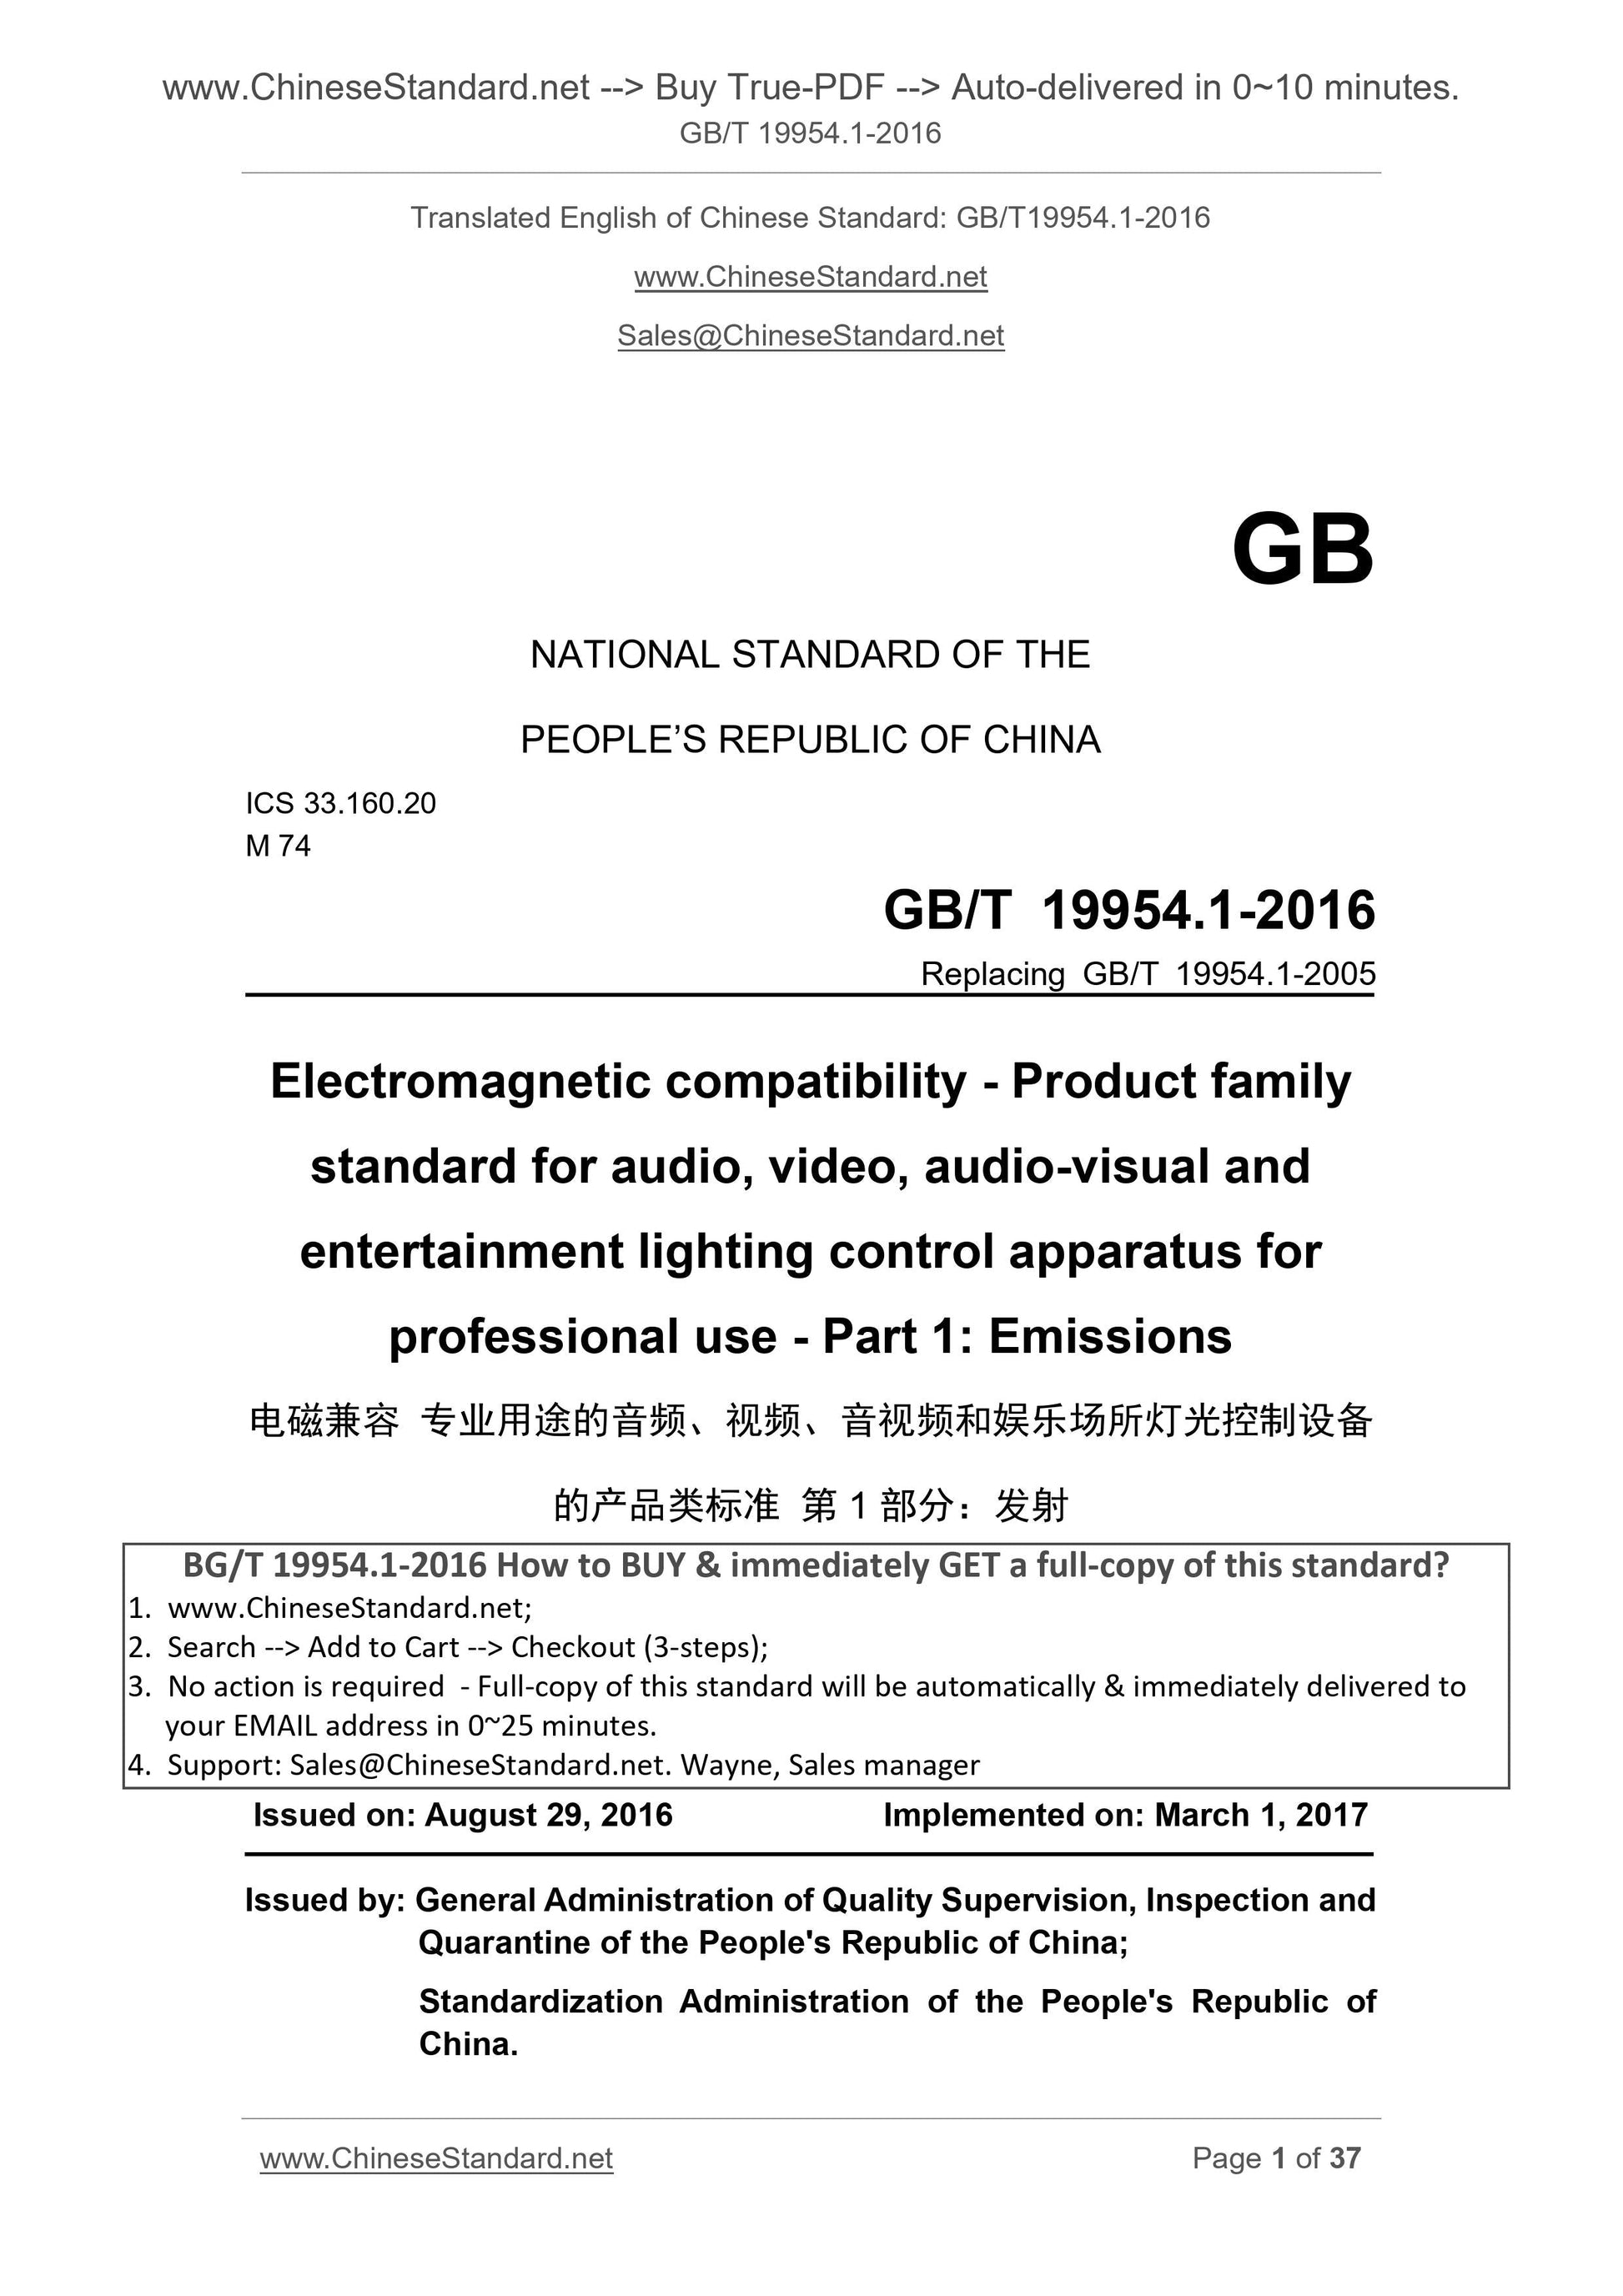 GB/T 19954.1-2016 Page 1